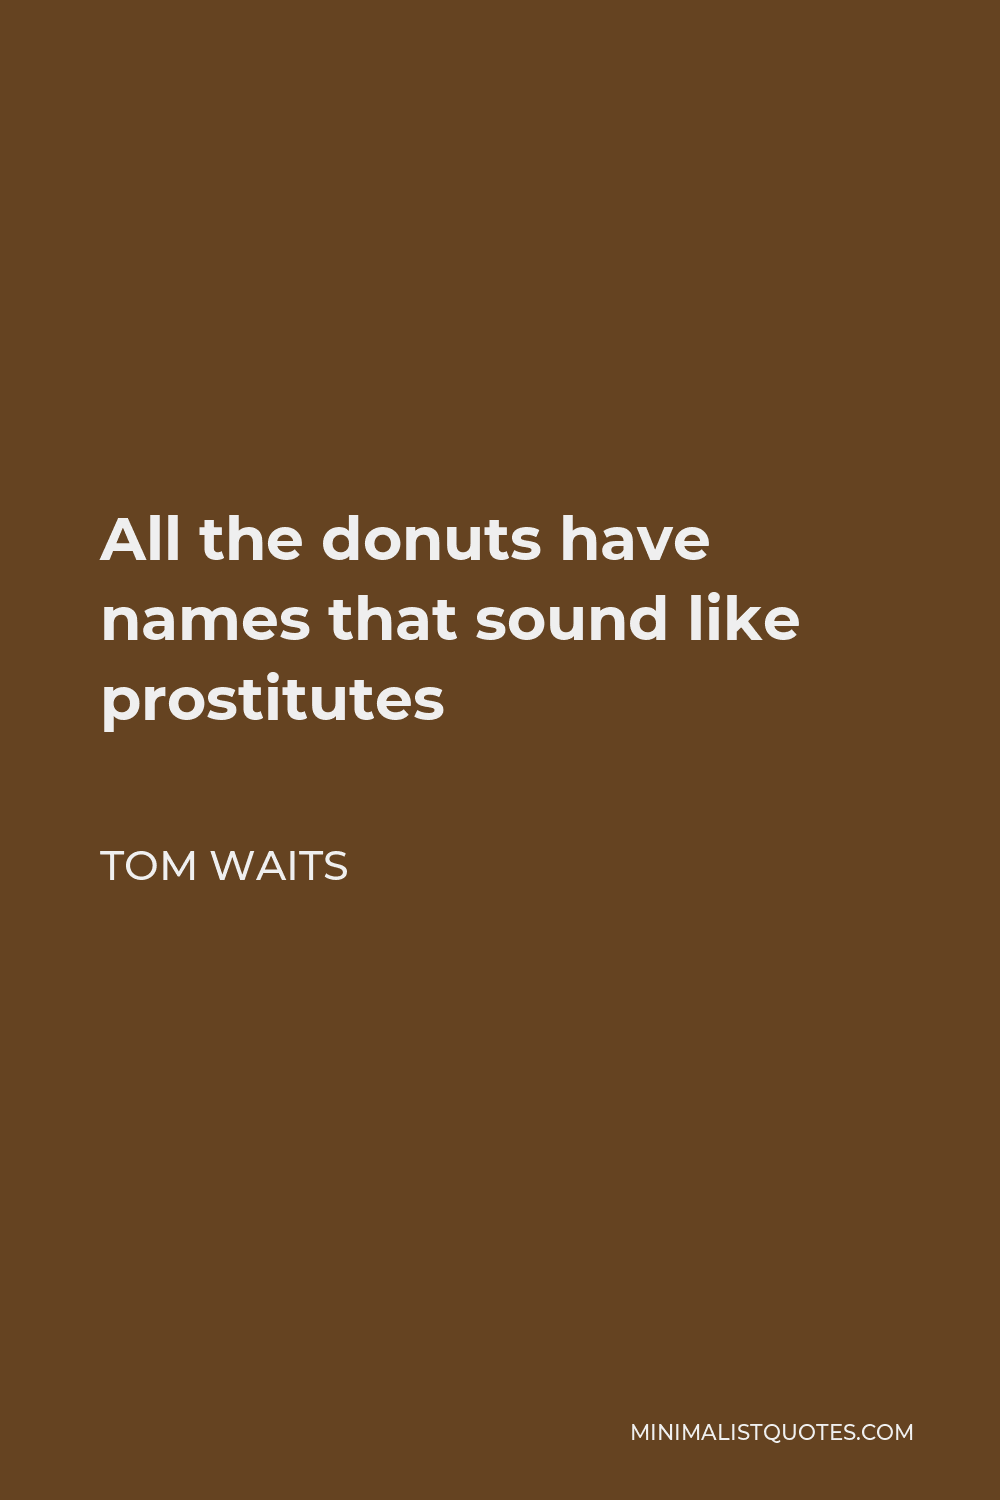 Tom Waits Quote - All the donuts have names that sound like prostitutes